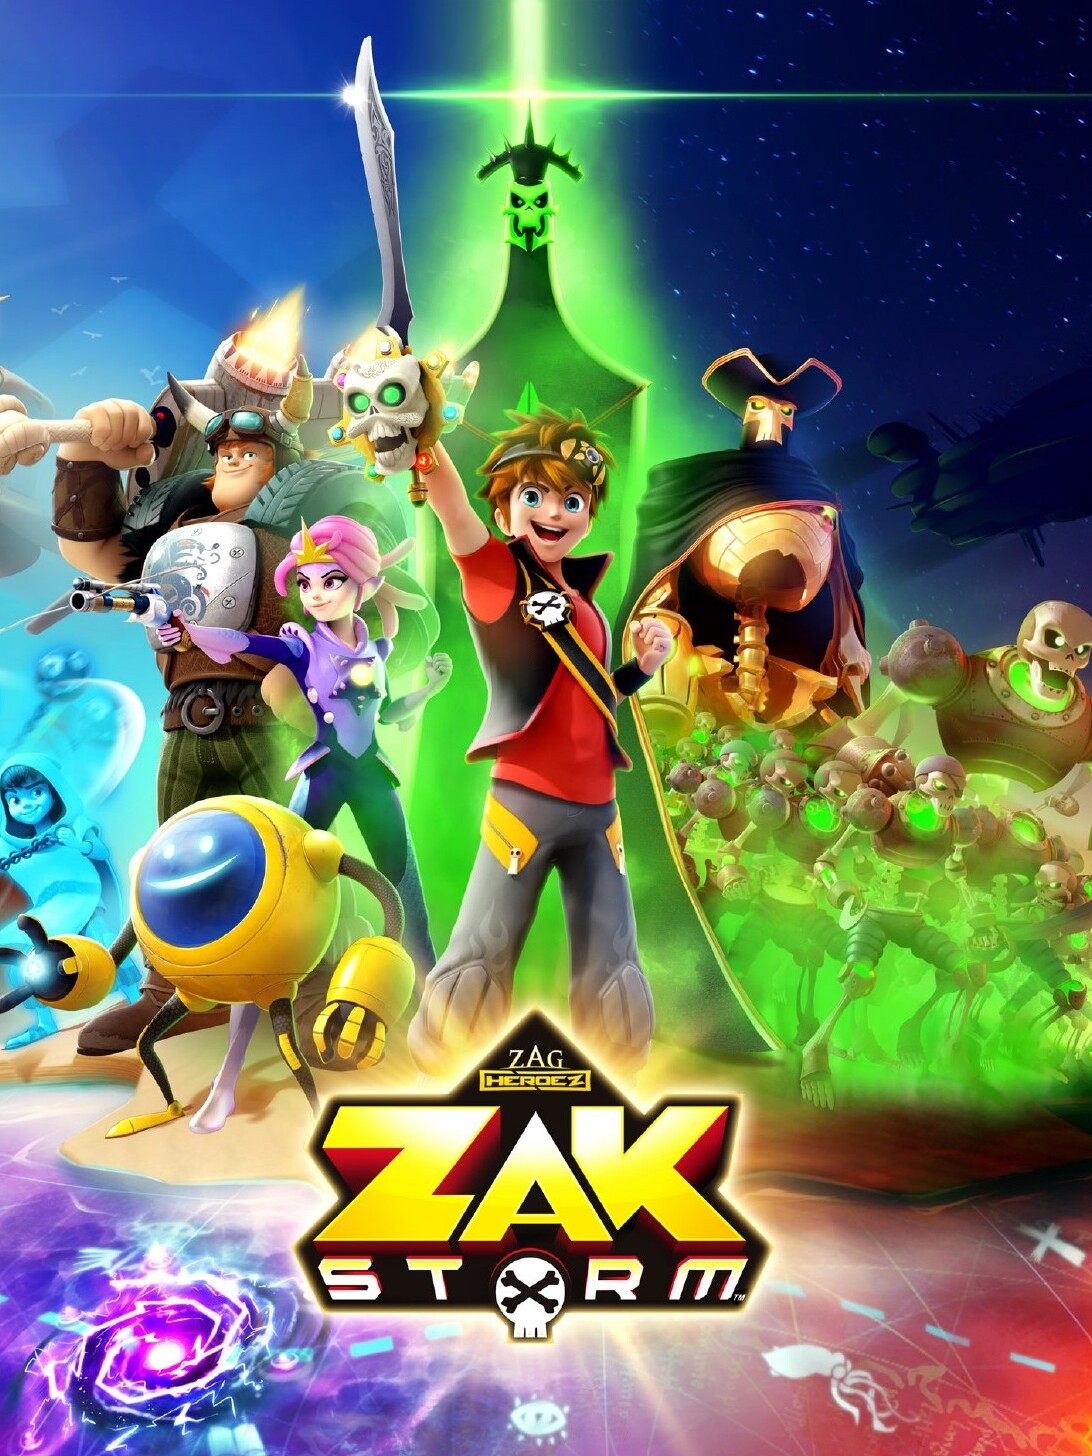 https://static.wikia.nocookie.net/spacetoon/images/7/75/Zak_storm.jpg/revision/latest?cb=20220818105821